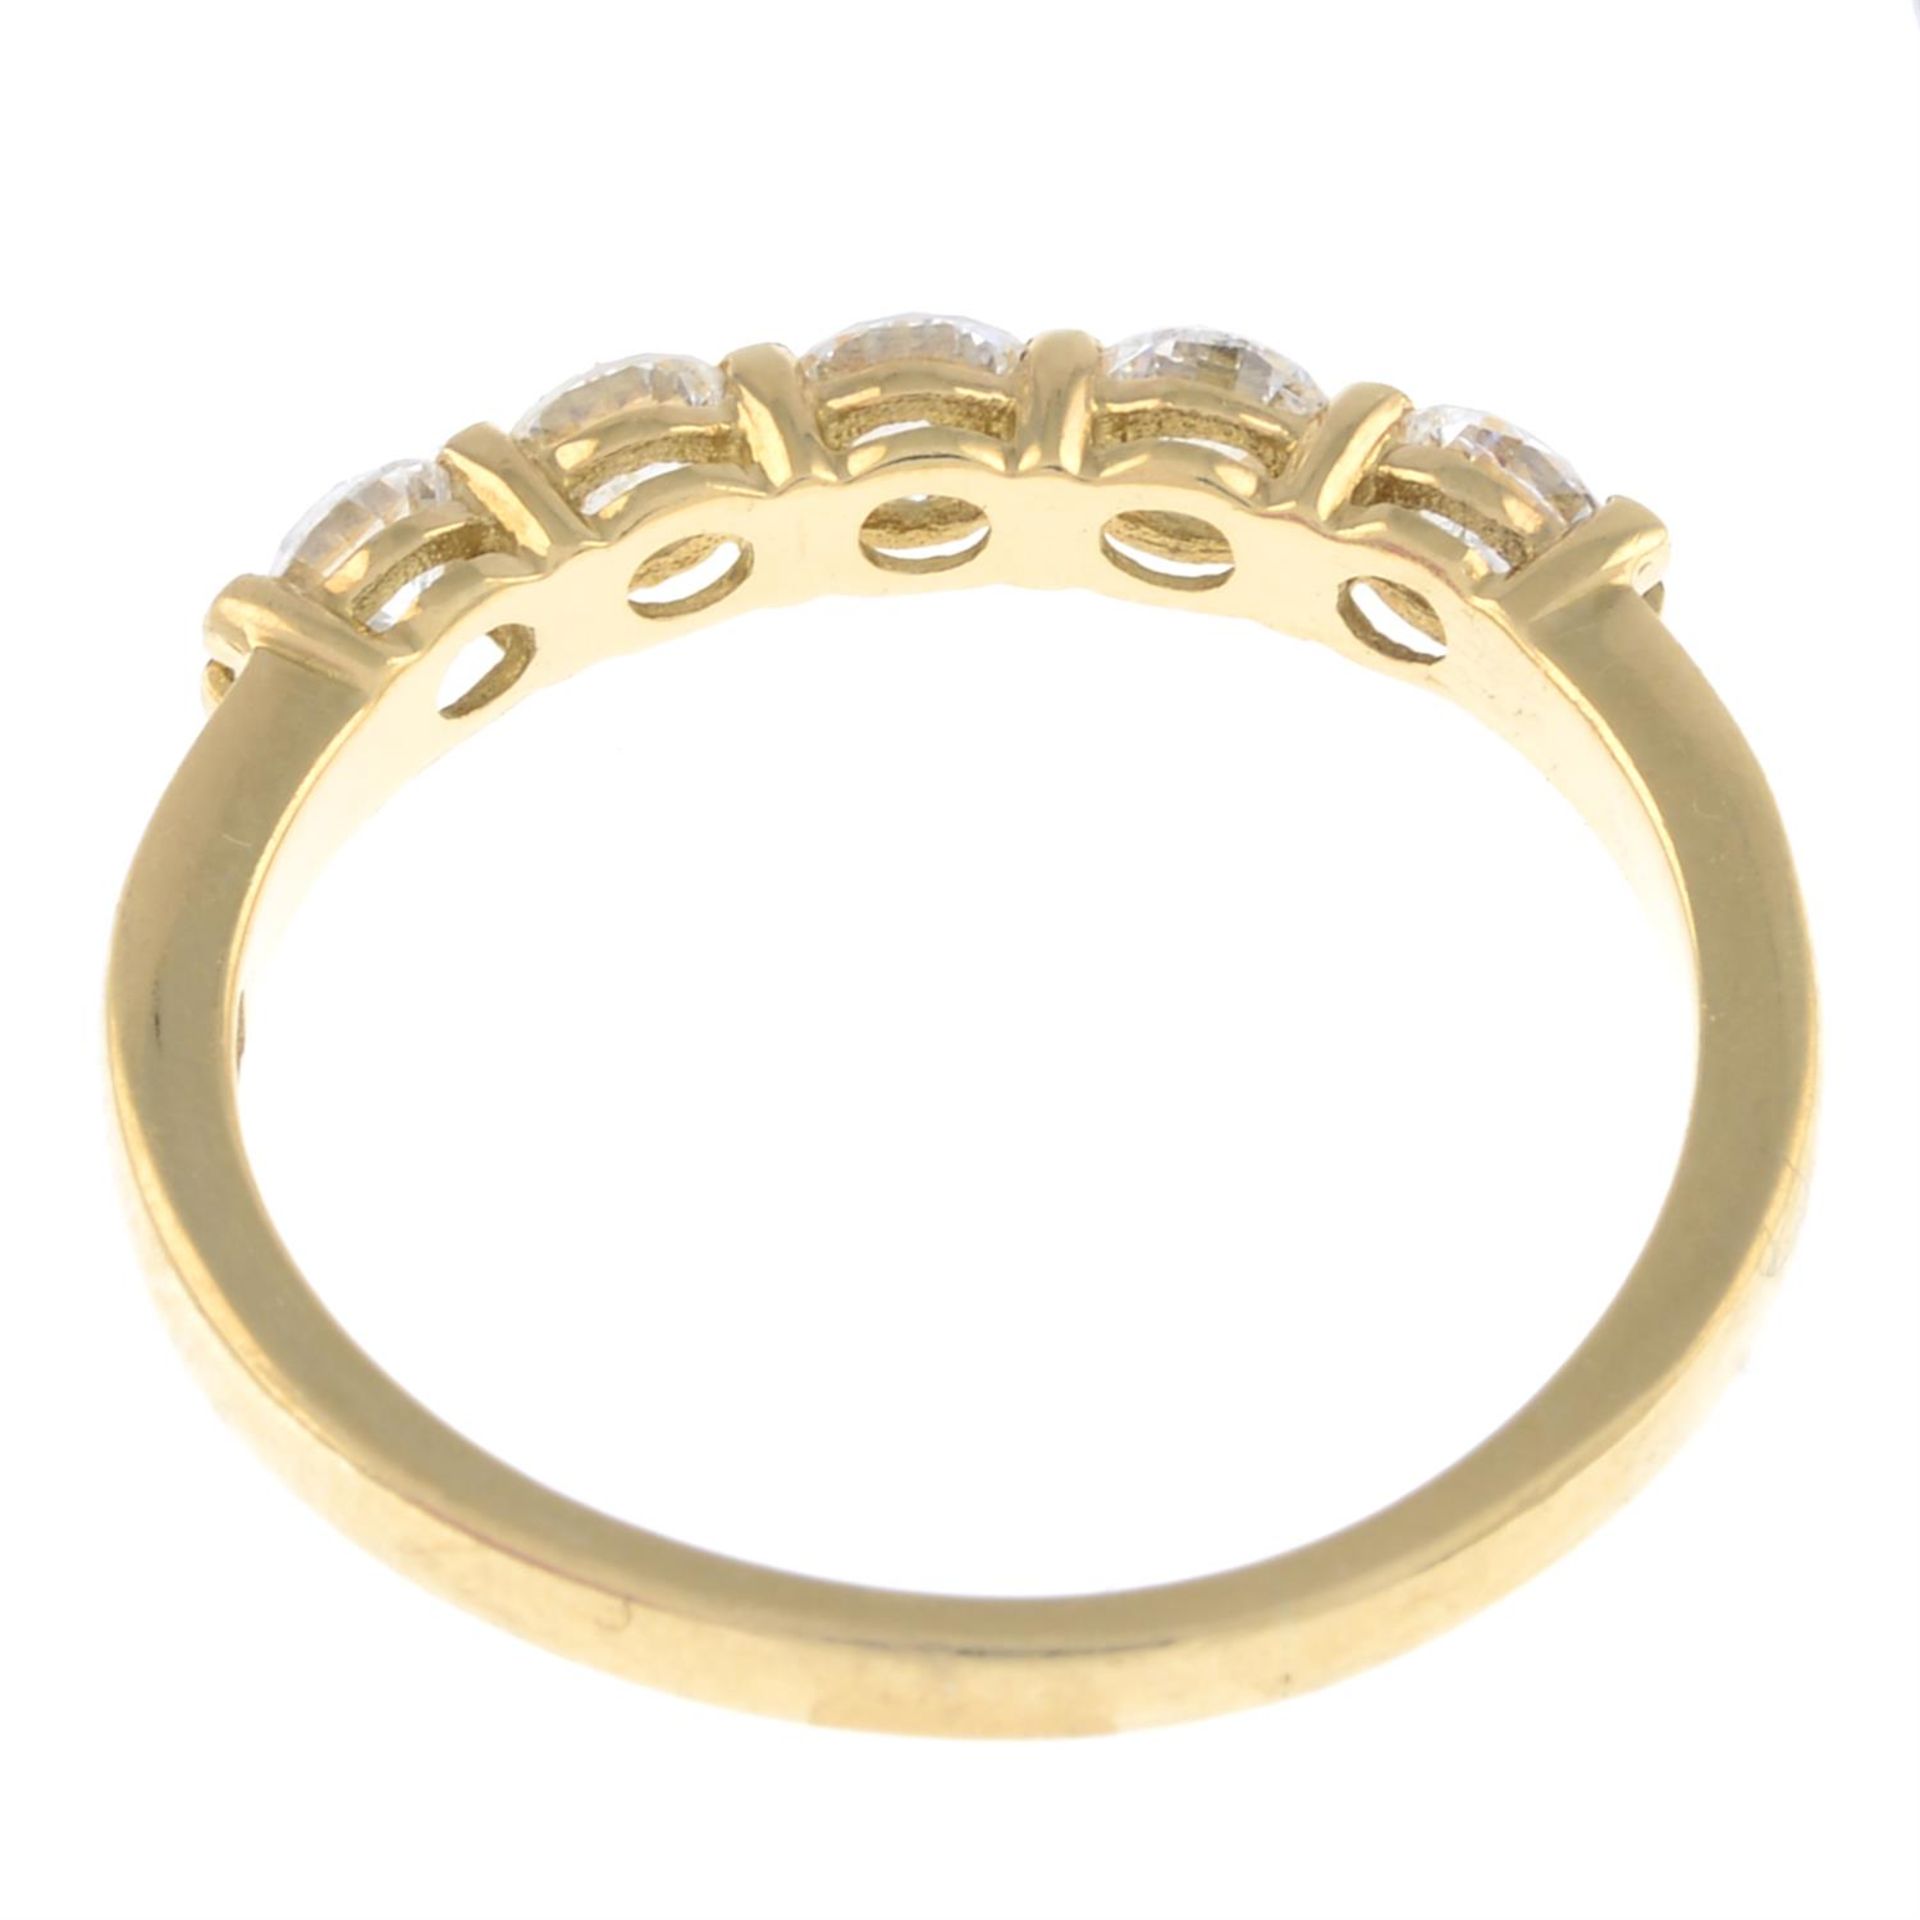 18ct gold diamond five-stone ring - Image 2 of 2